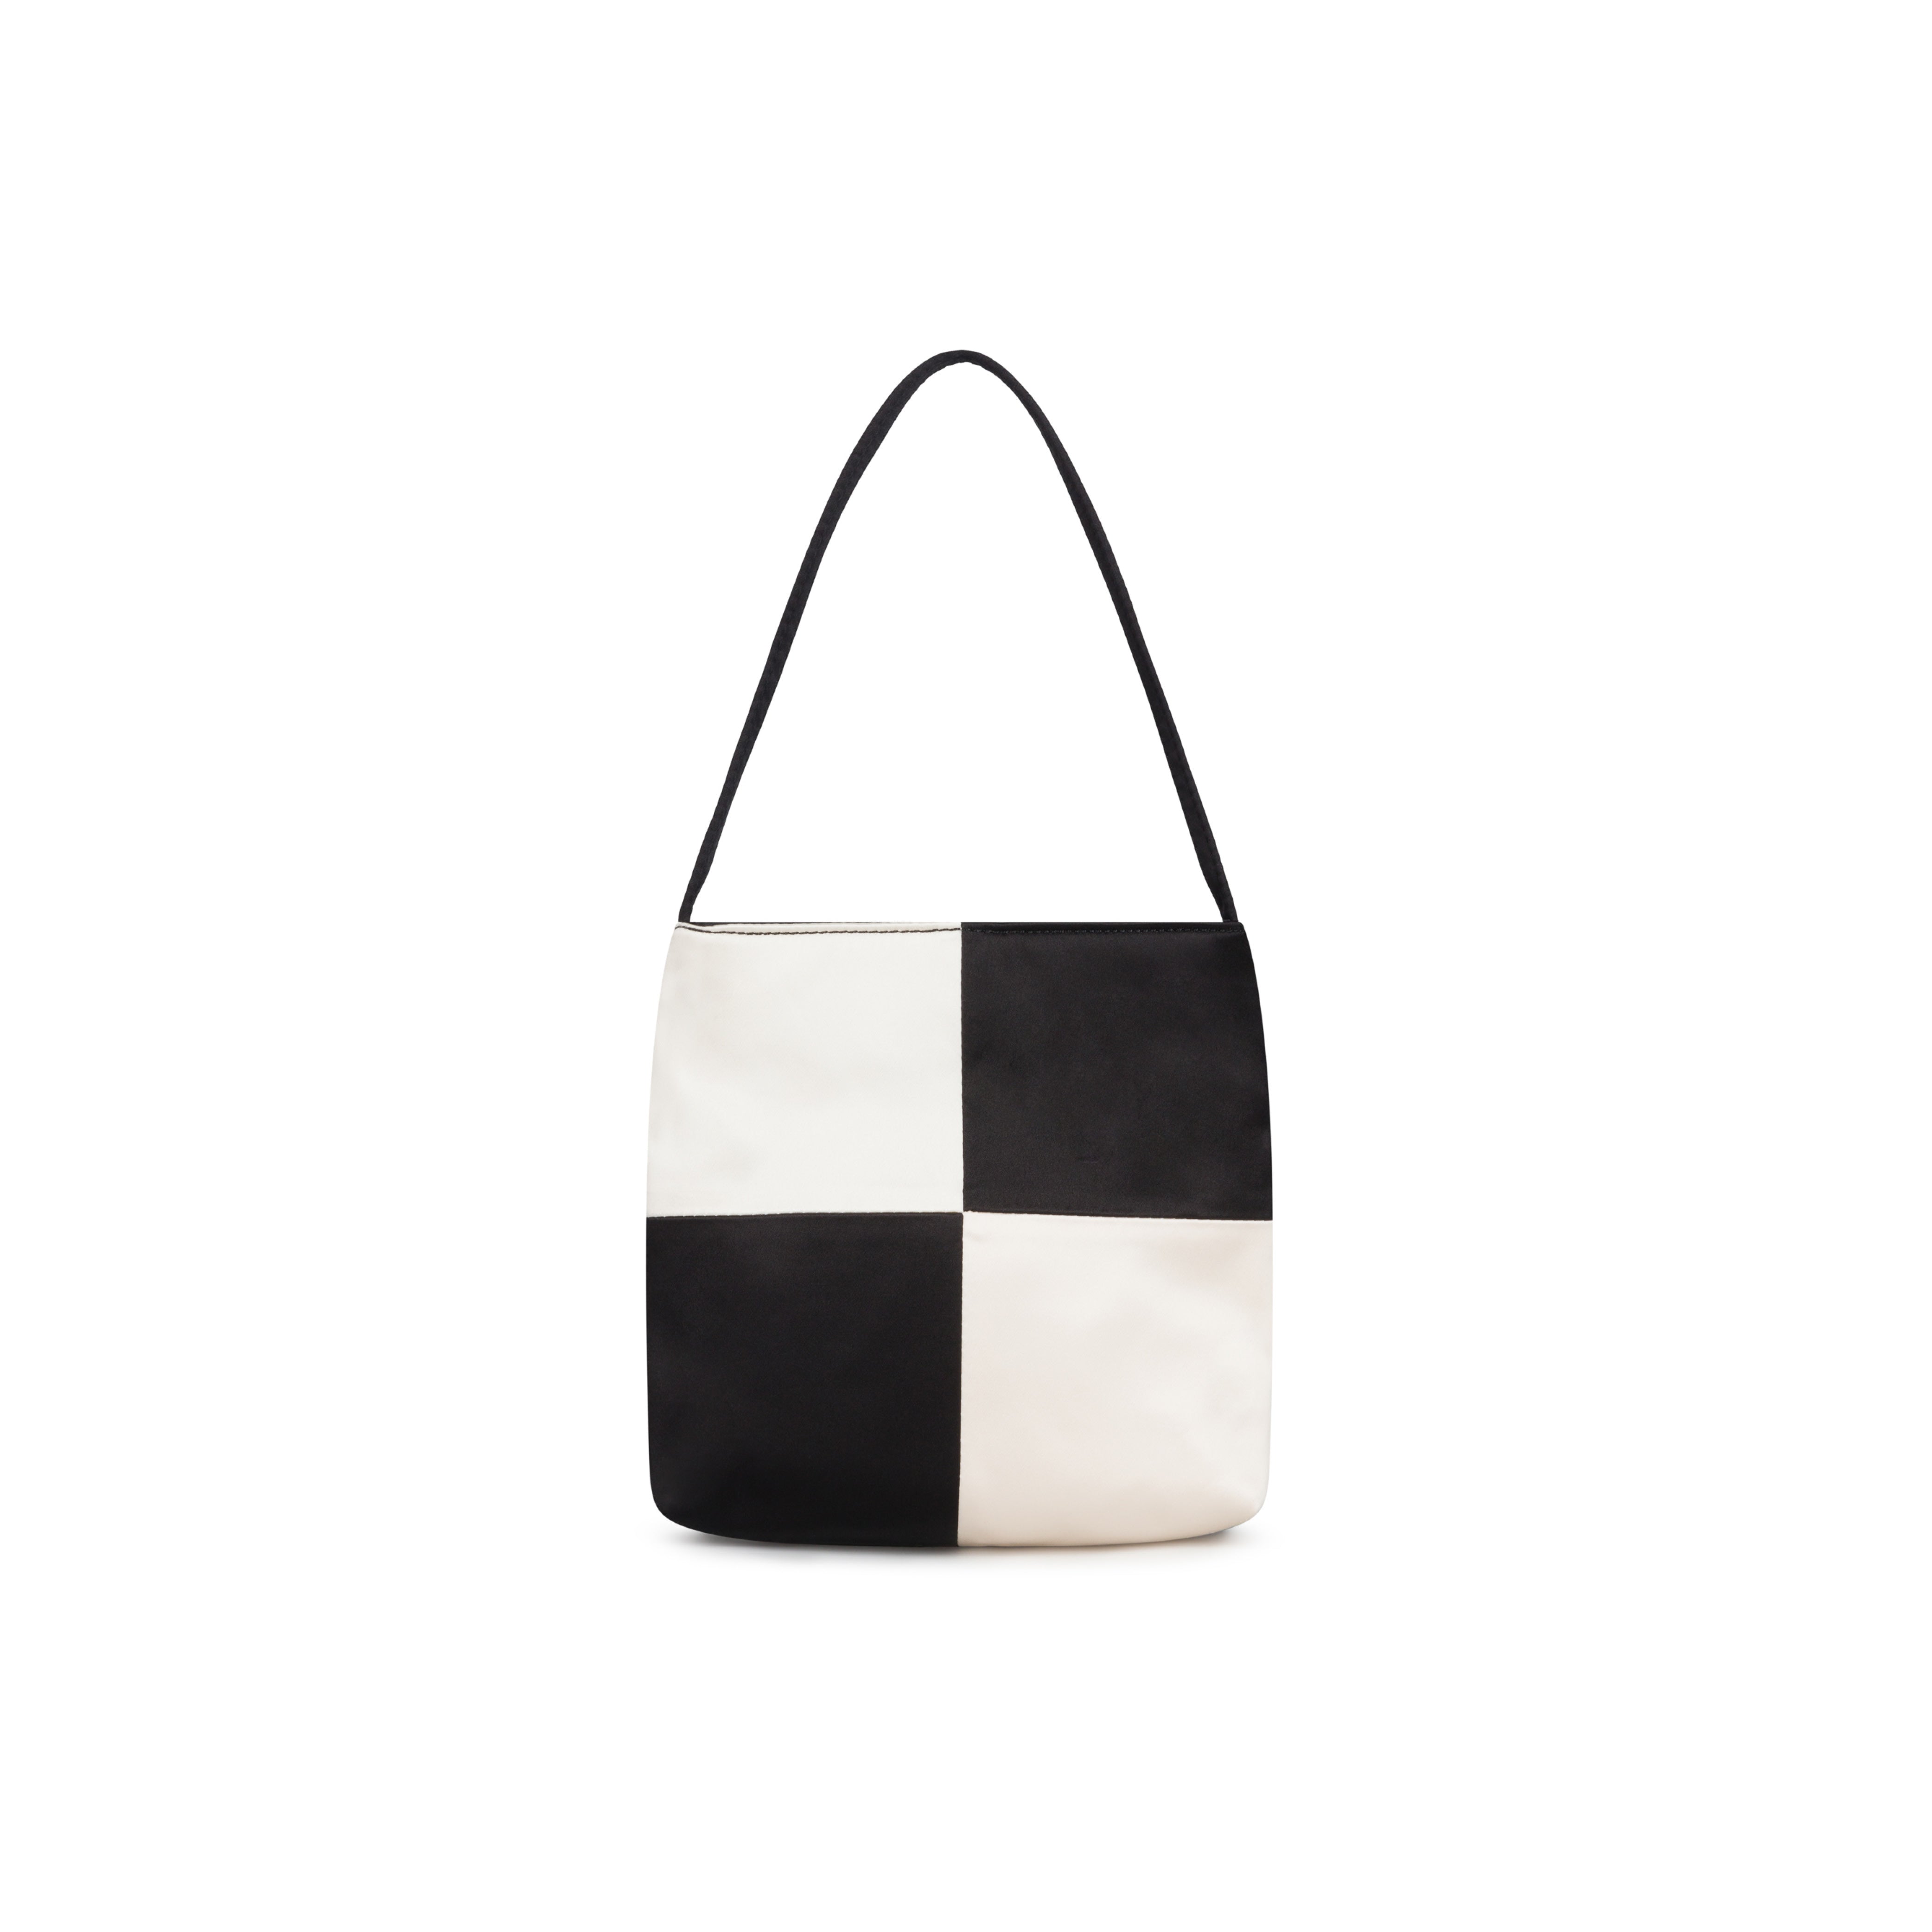 hai シルク バッグVera Bag in Black and Ivory